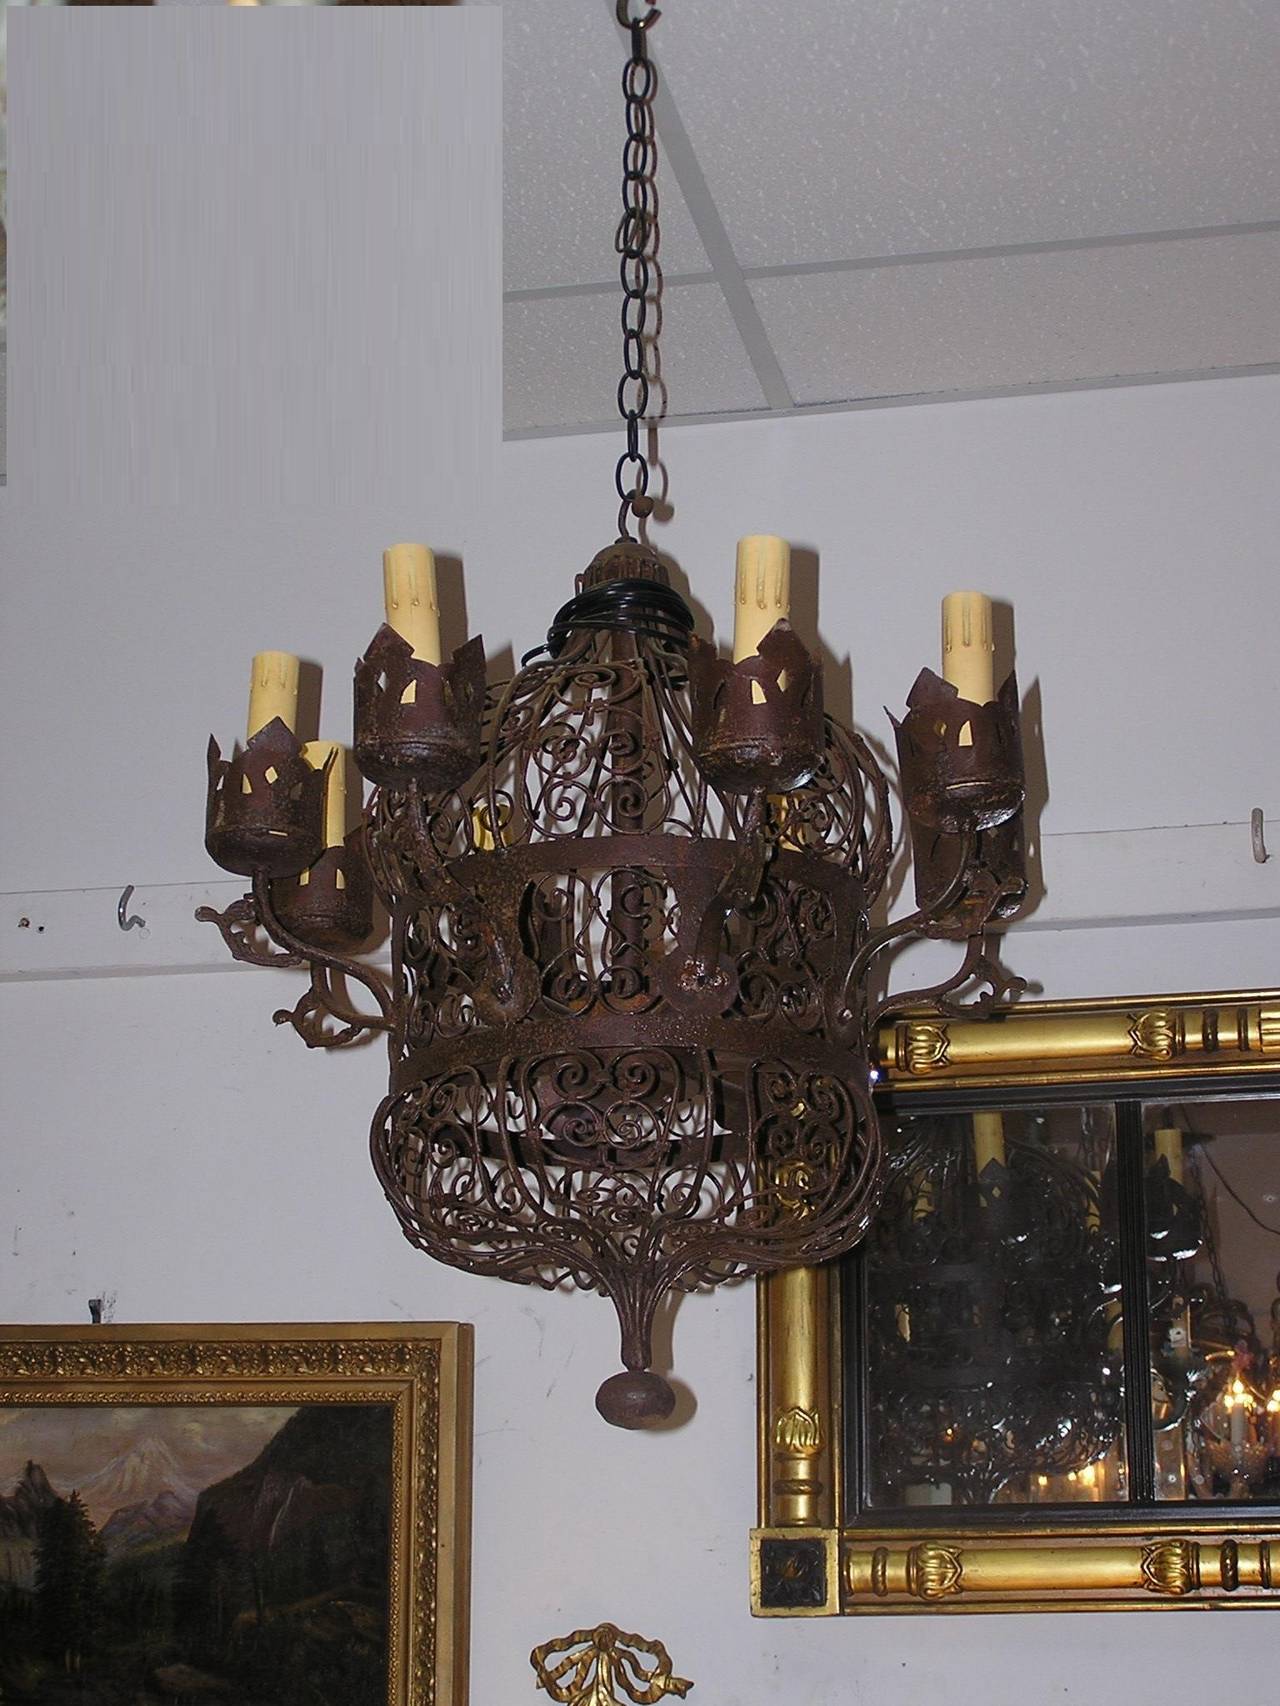 American wrought iron eight light chandelier with decorative scrolled wire work, pierced decorative bobaches, and terminating on centered tapered iron ball finial.  Mid 19th Century.  Chandelier was originally gas and has been electrified.